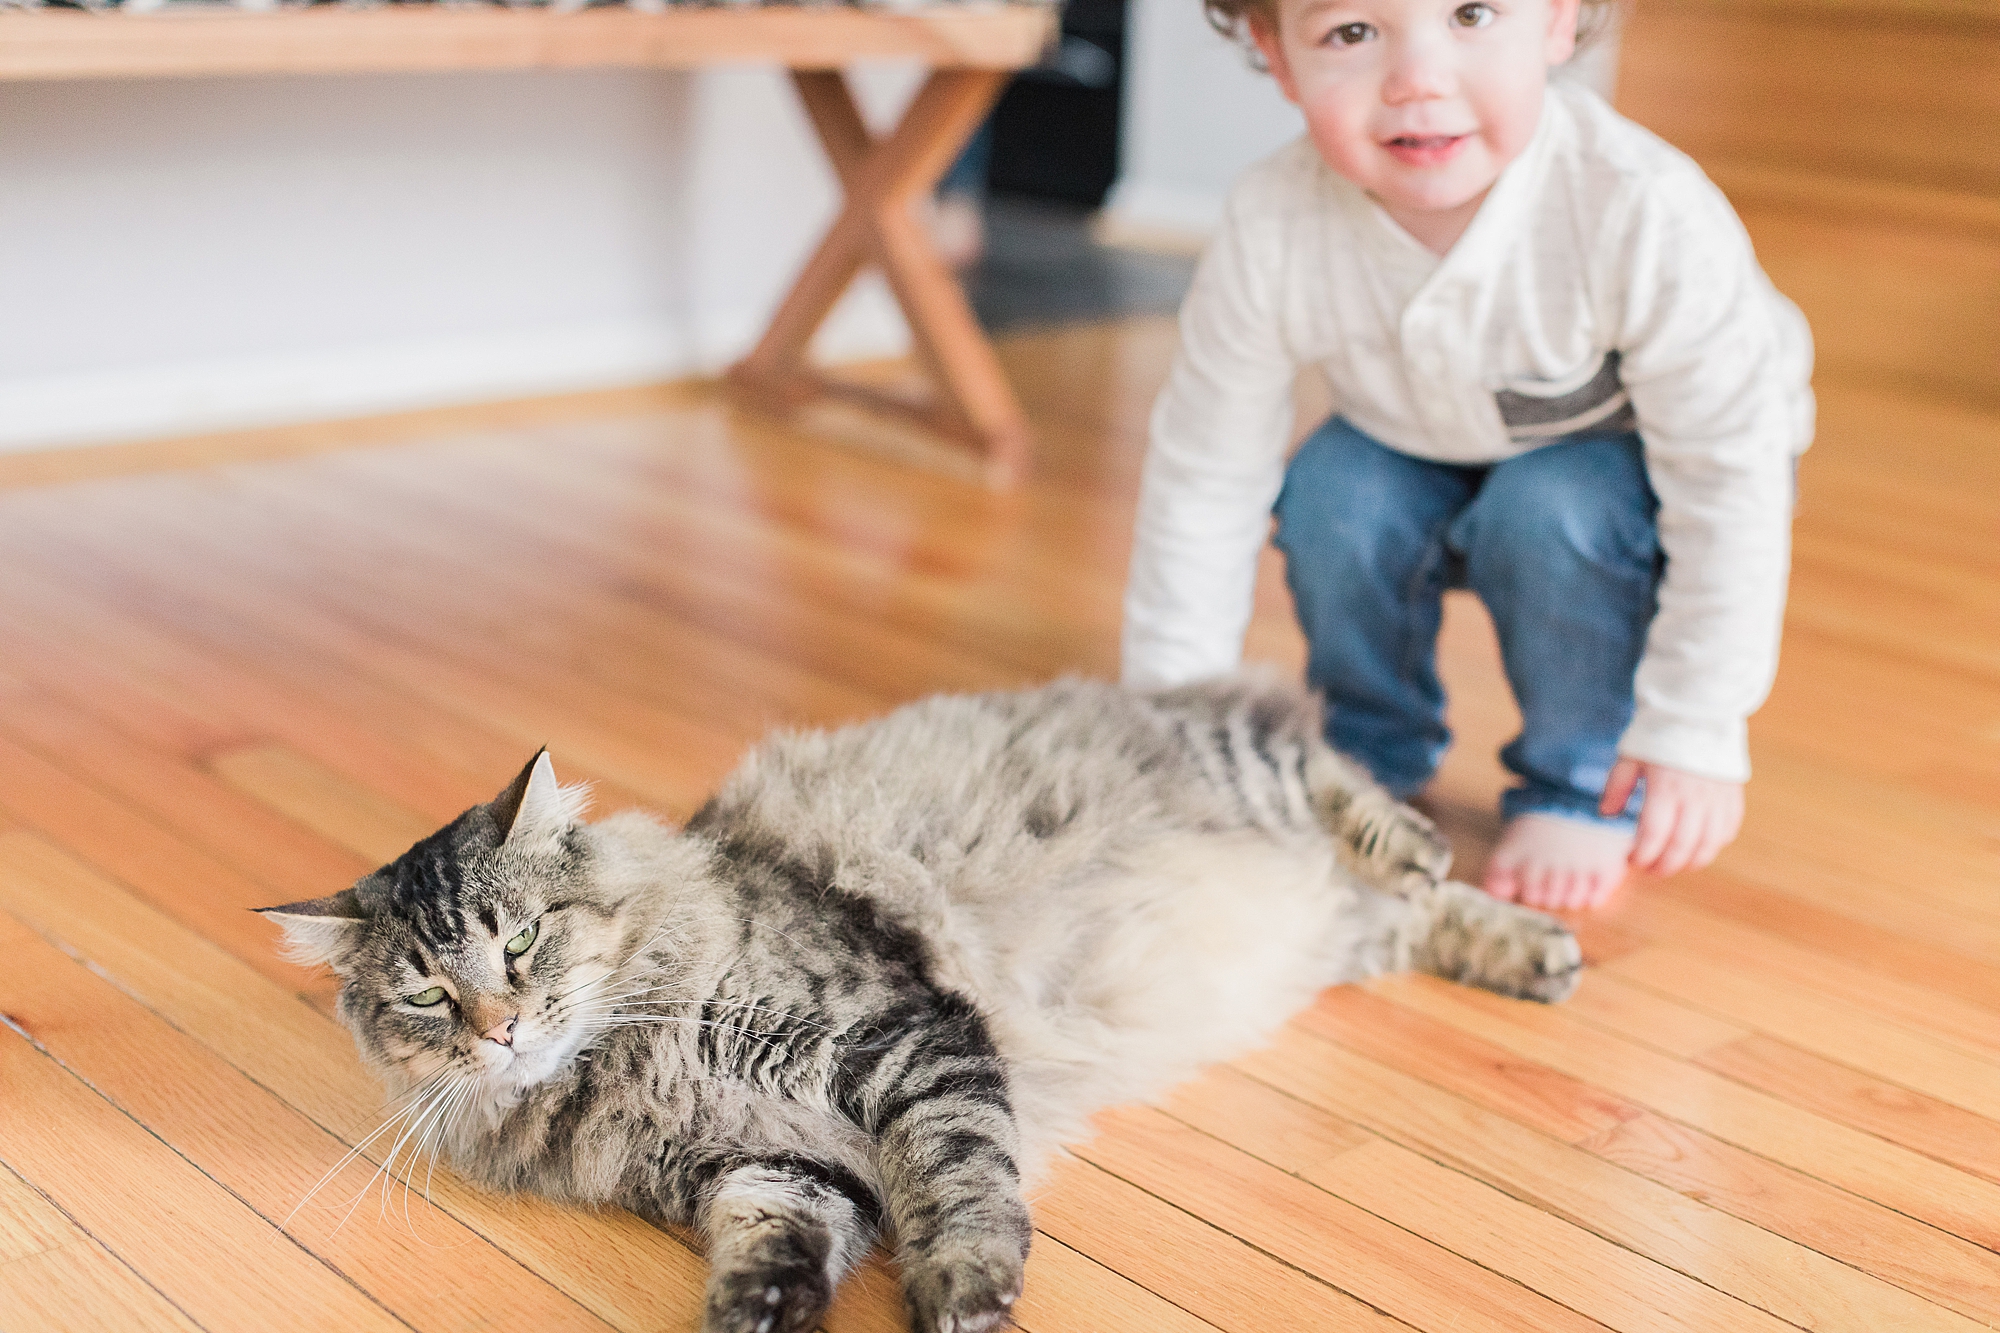 boy plays with cat on wooden floor at home